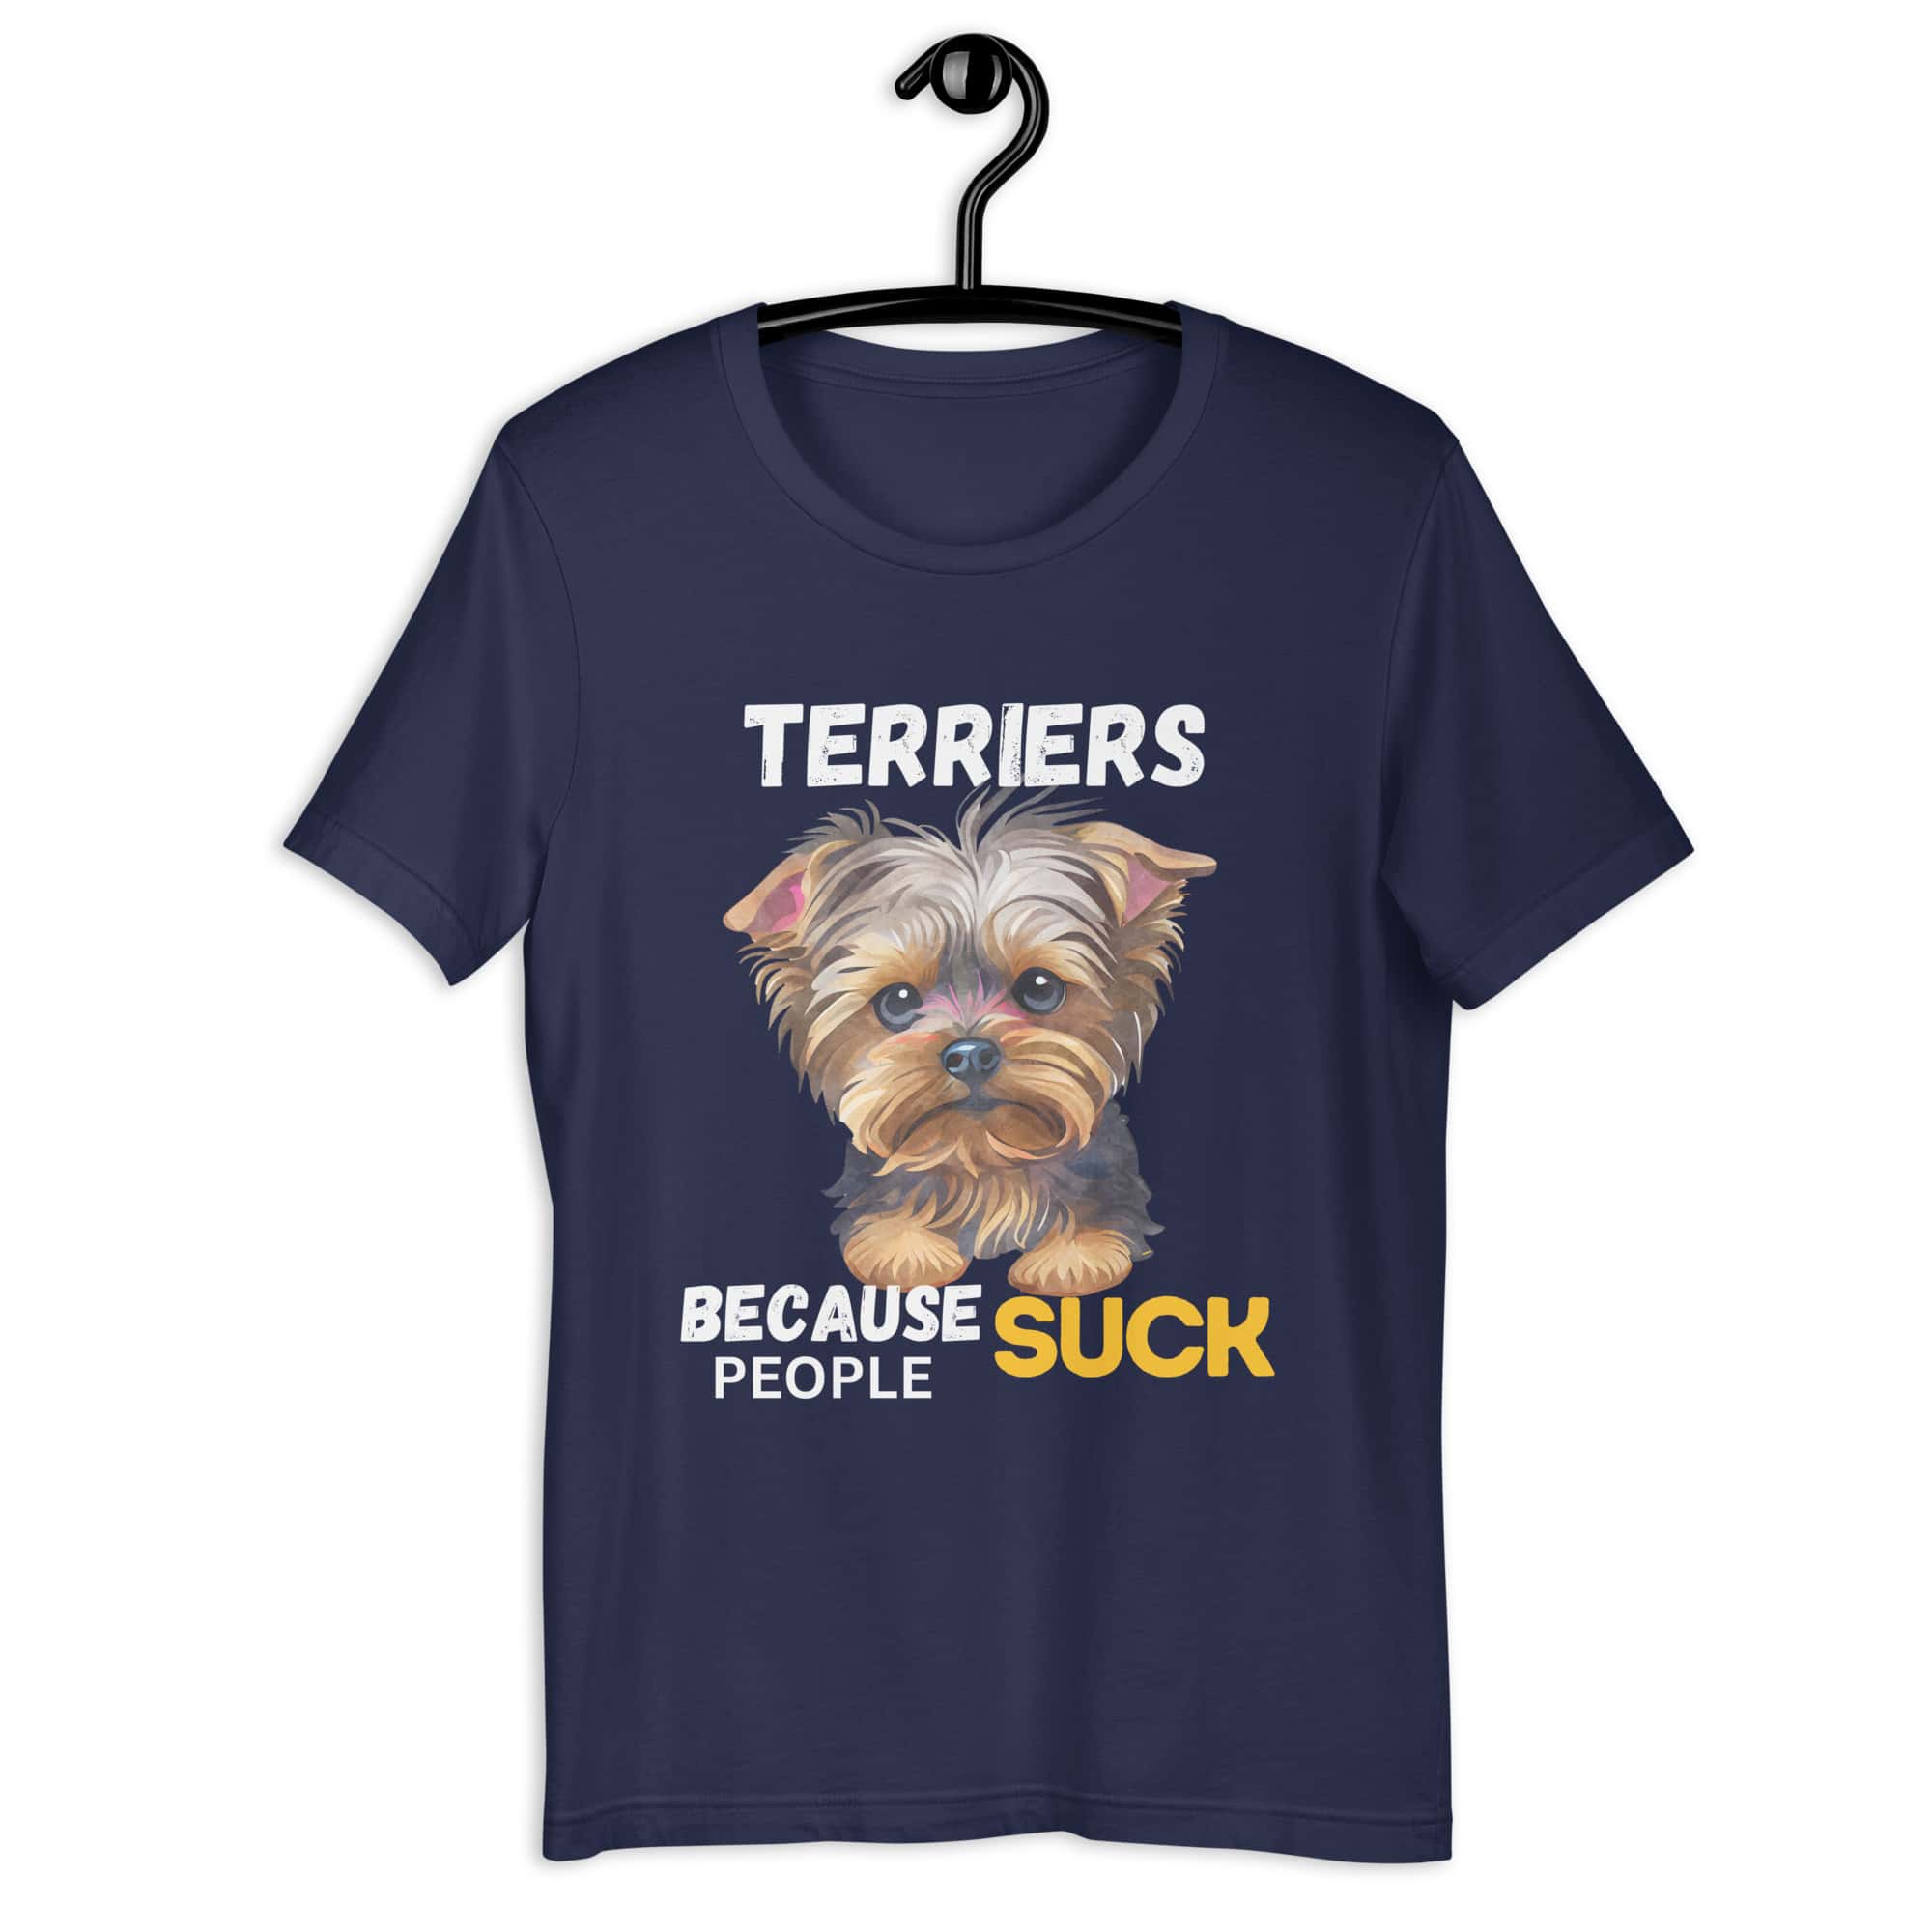 Terriers Because People Suck Unisex T-Shirt navy